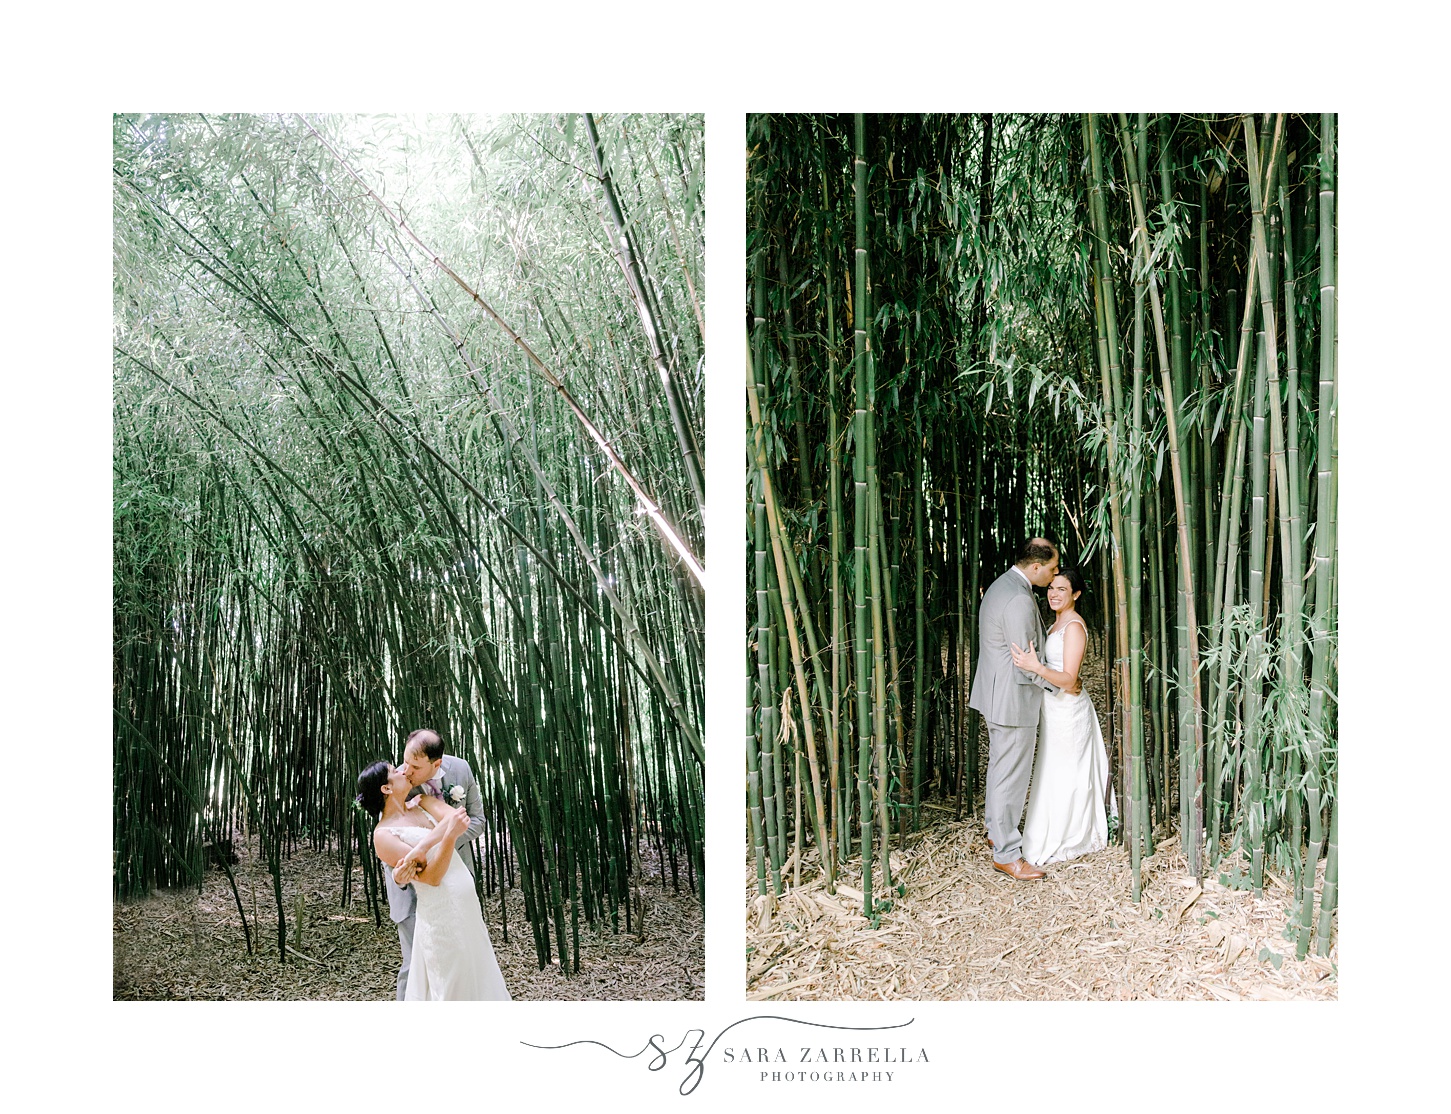 portraits of bride and groom in bamboo outside Jewish wedding ceremony at Blithewold Mansion